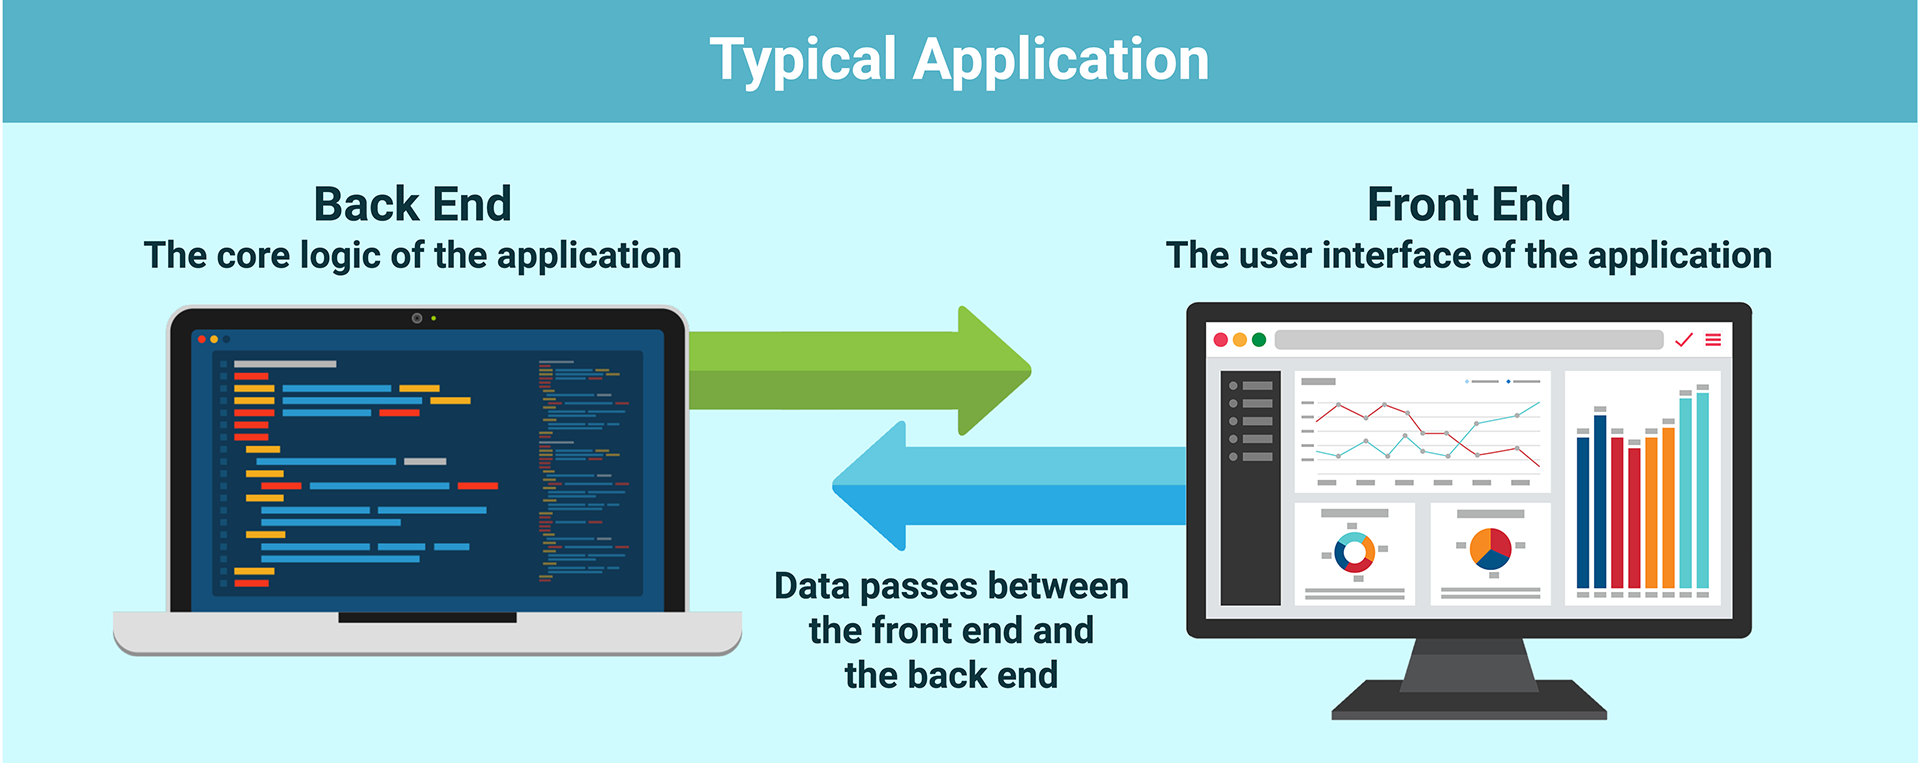 Back and front end of applications